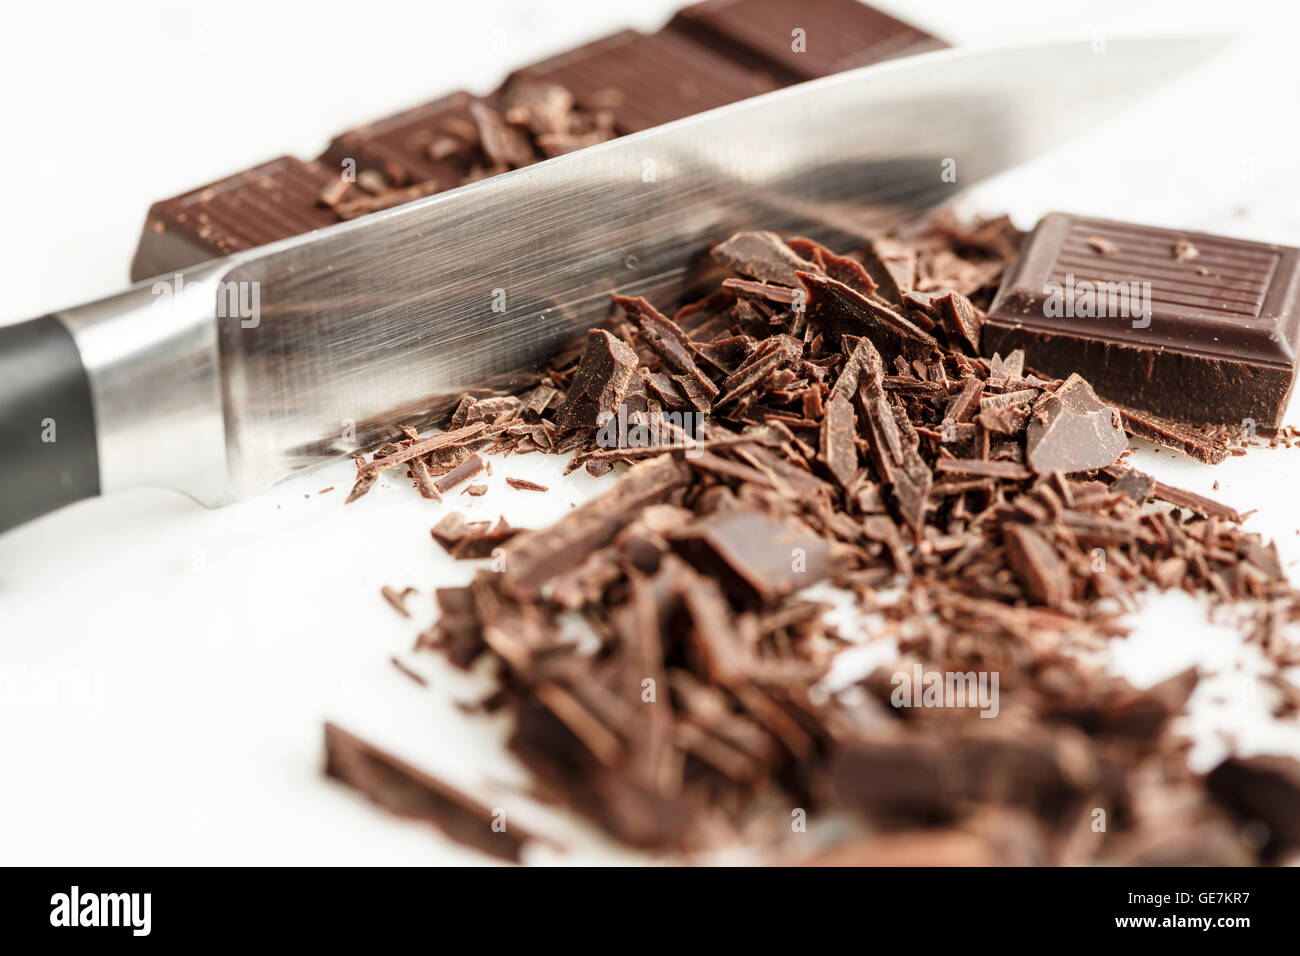 chocolate bar and shavings with a knife on white background Stock Photo